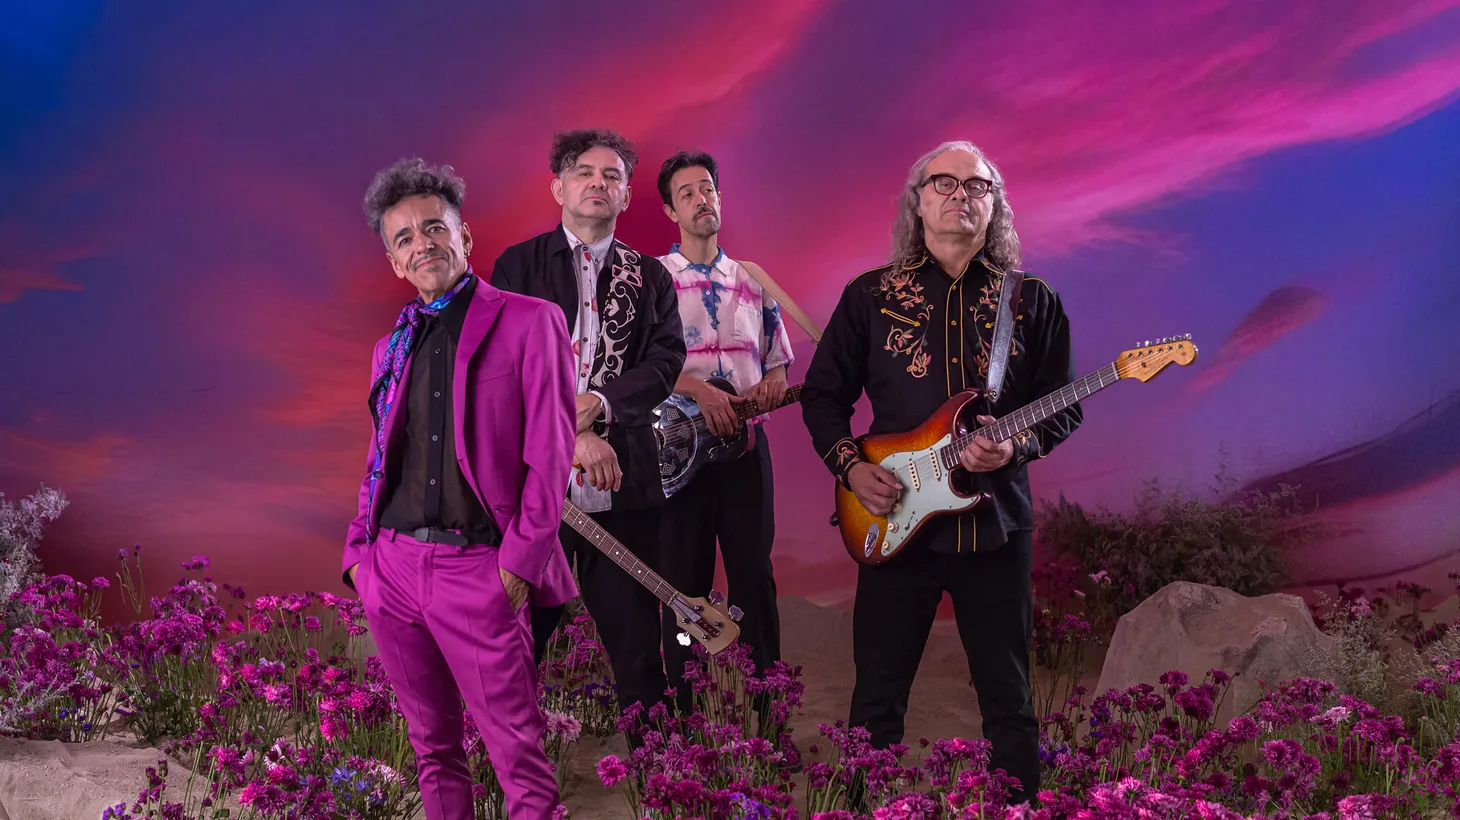 Mexican rock legends and social ambassadors Café Tacvba are back with their first track in seven years. “La Bas(e),” or “The Base” in English, is a song to foster unity, liberty, brotherhood, and human rights for immigrants.